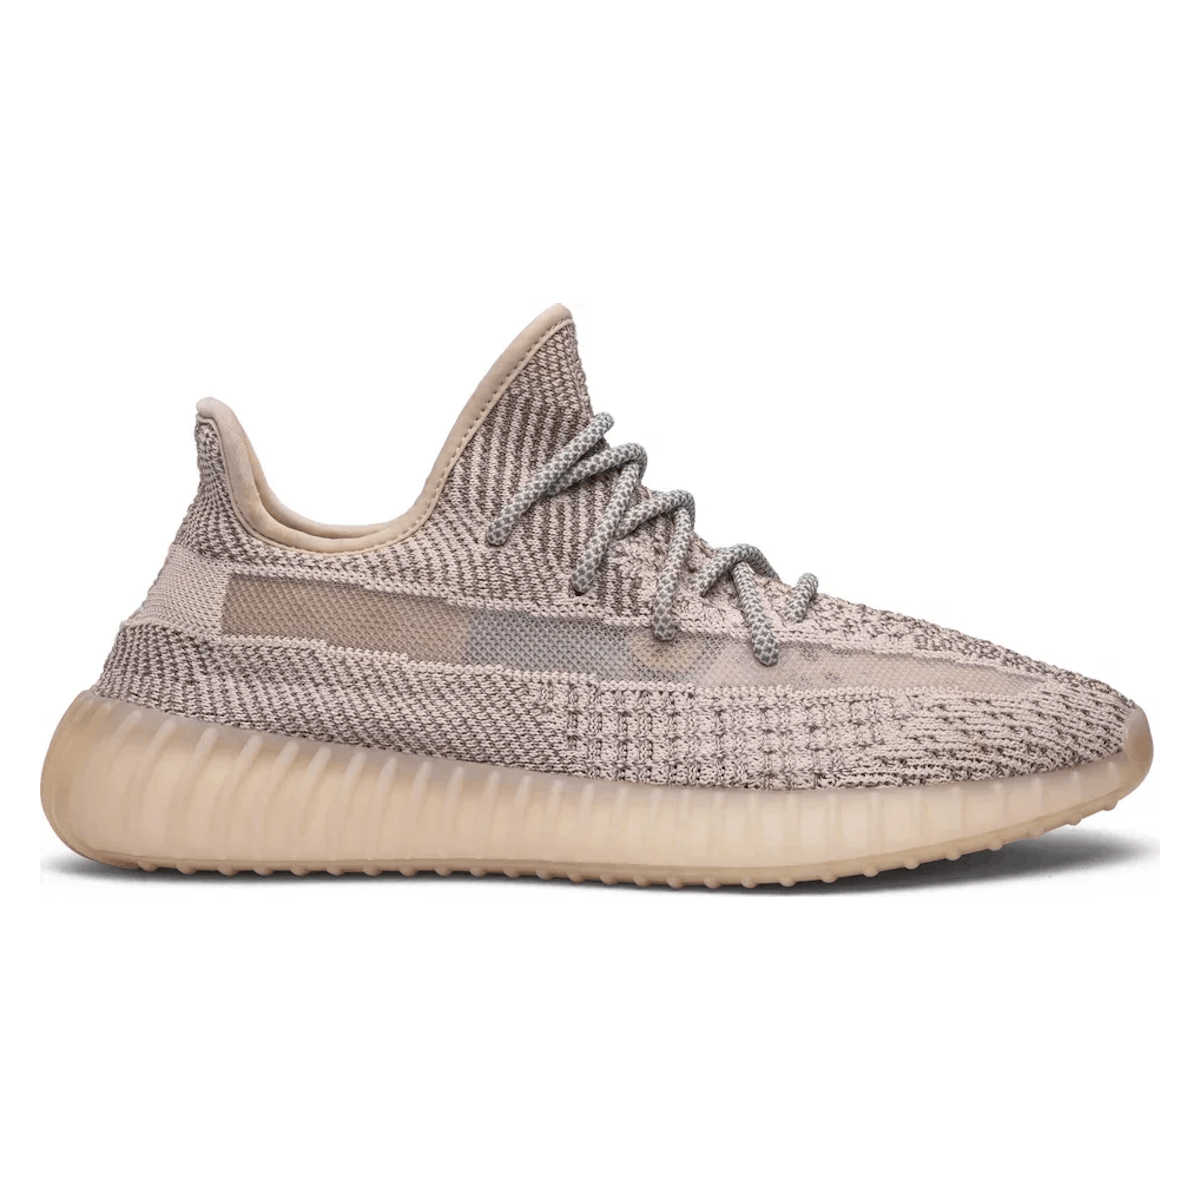 adidas Yeezy Boost 350 V2 "Synth (Reflective)"